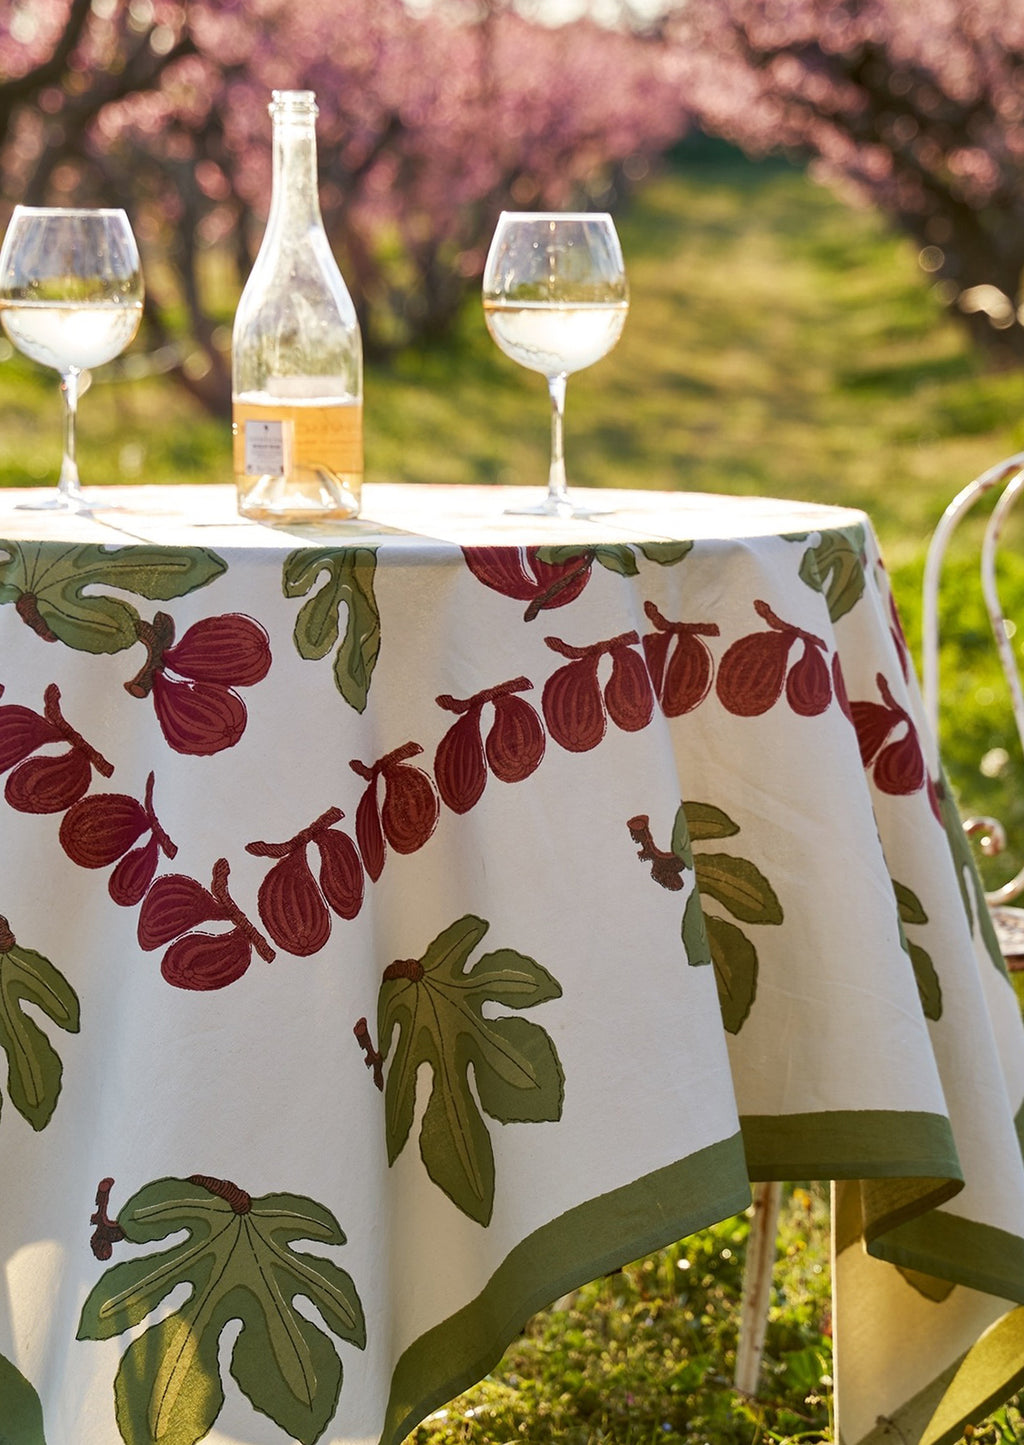 4: A block printed tablecloth with fig fruit and leaf pattern.